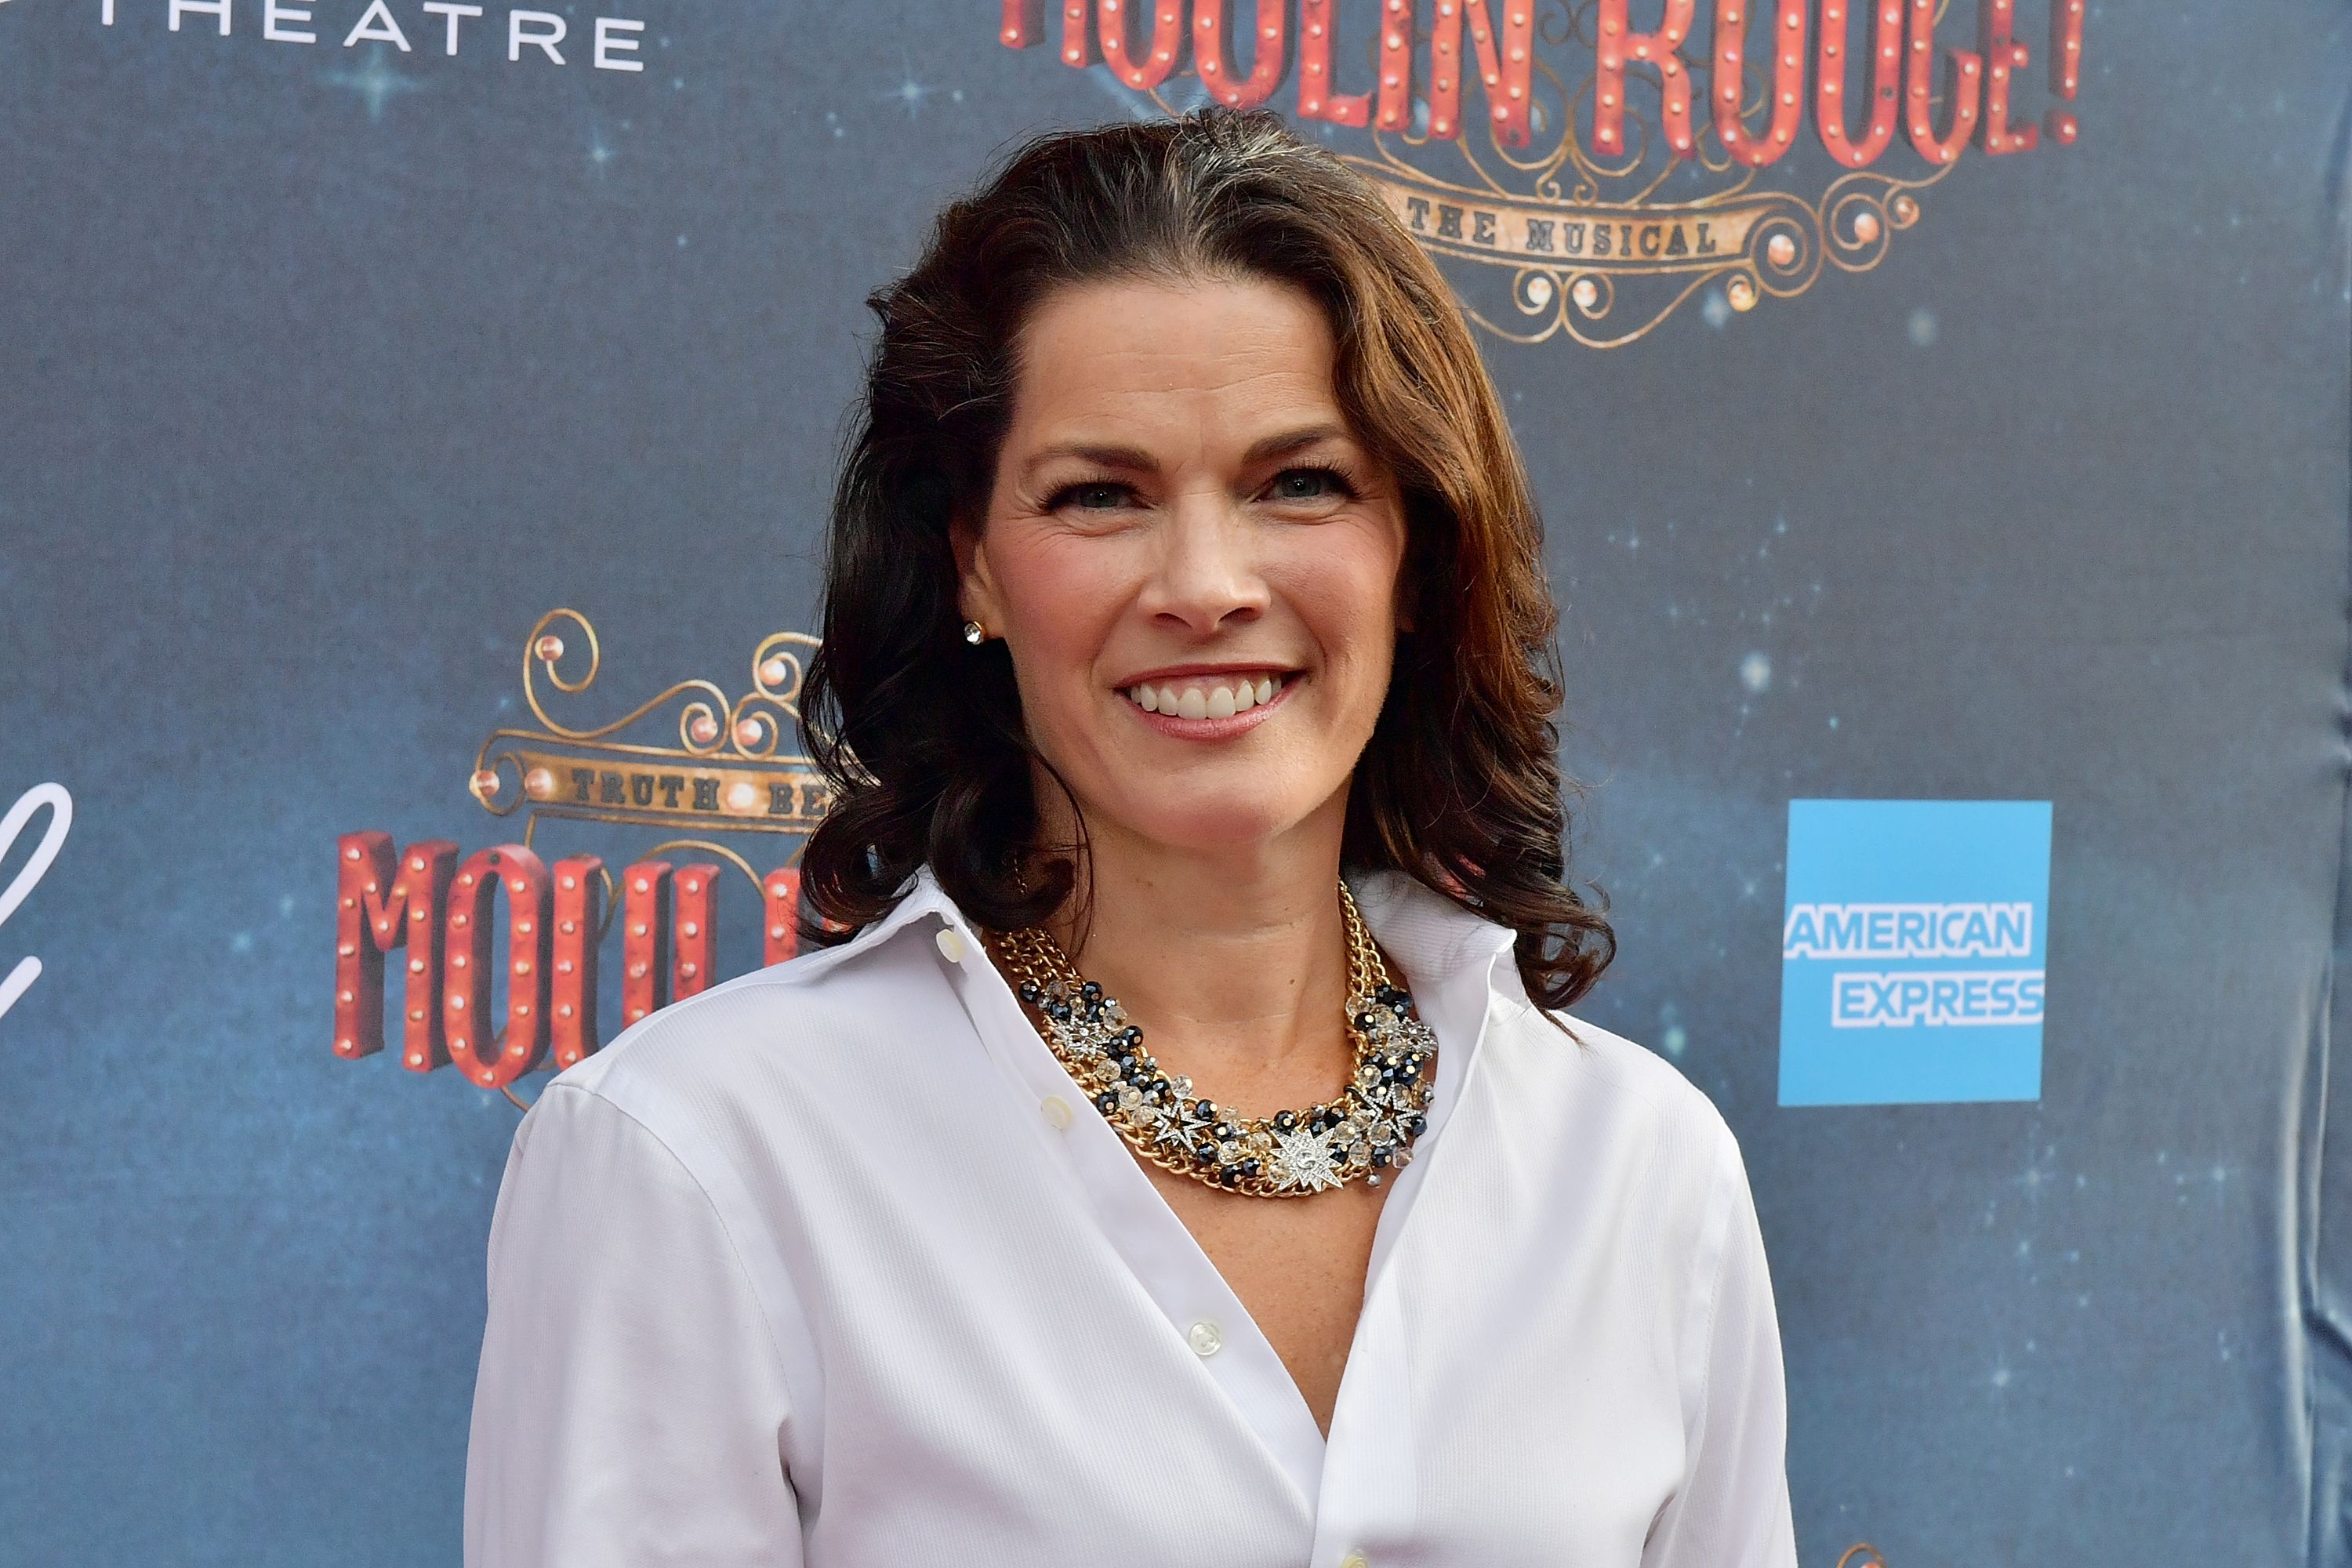 Olympian Nancy Kerrigan at the grand re-opening of Boston's Emerson Colonial Theatre with the gala performance of "Moulin Rouge! The Musical" at Emerson Colonial Theatre on July 29, 2018 | Photo: Getty Images